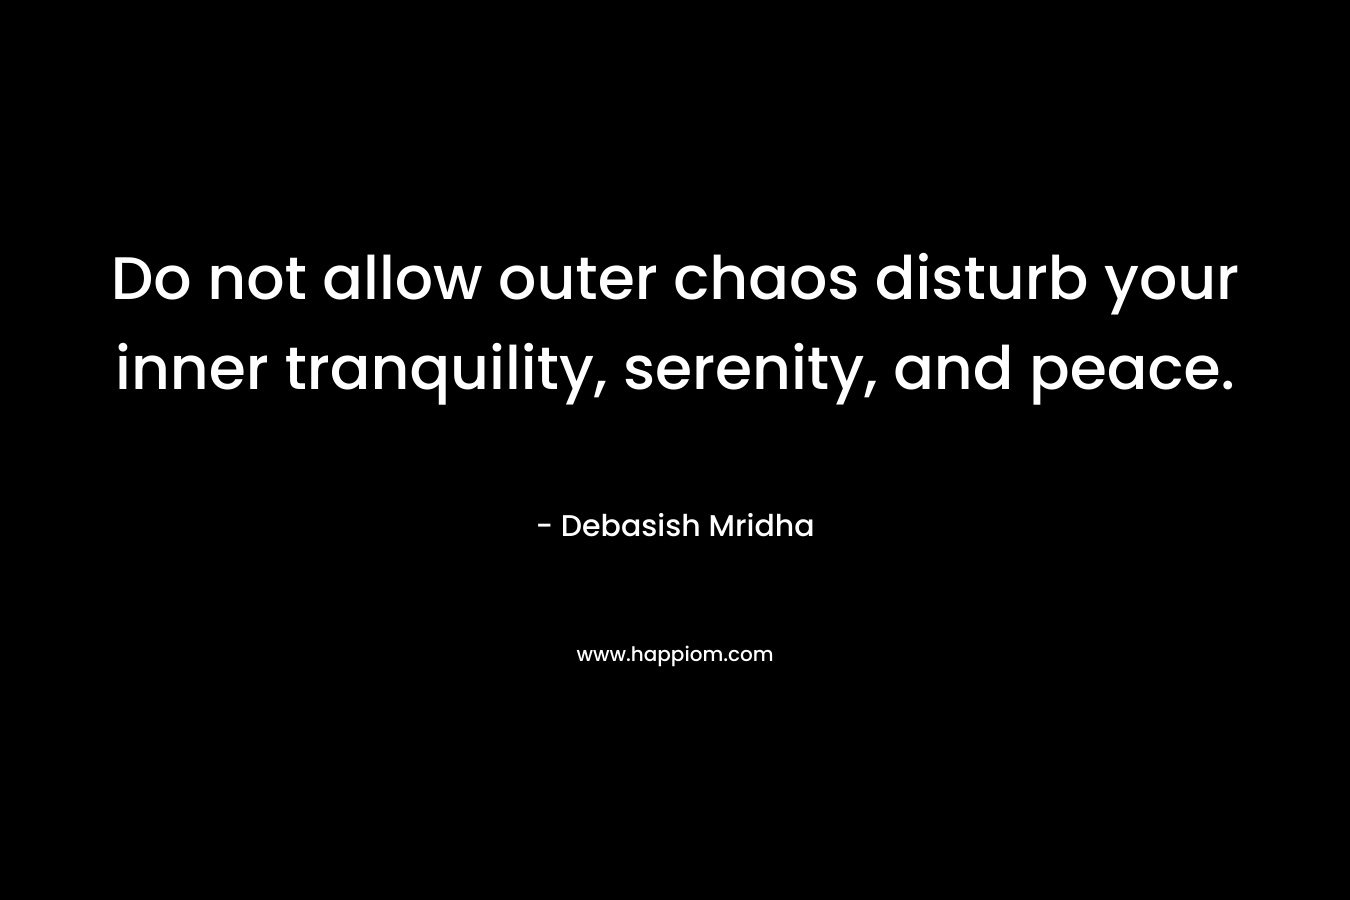 Do not allow outer chaos disturb your inner tranquility, serenity, and peace.